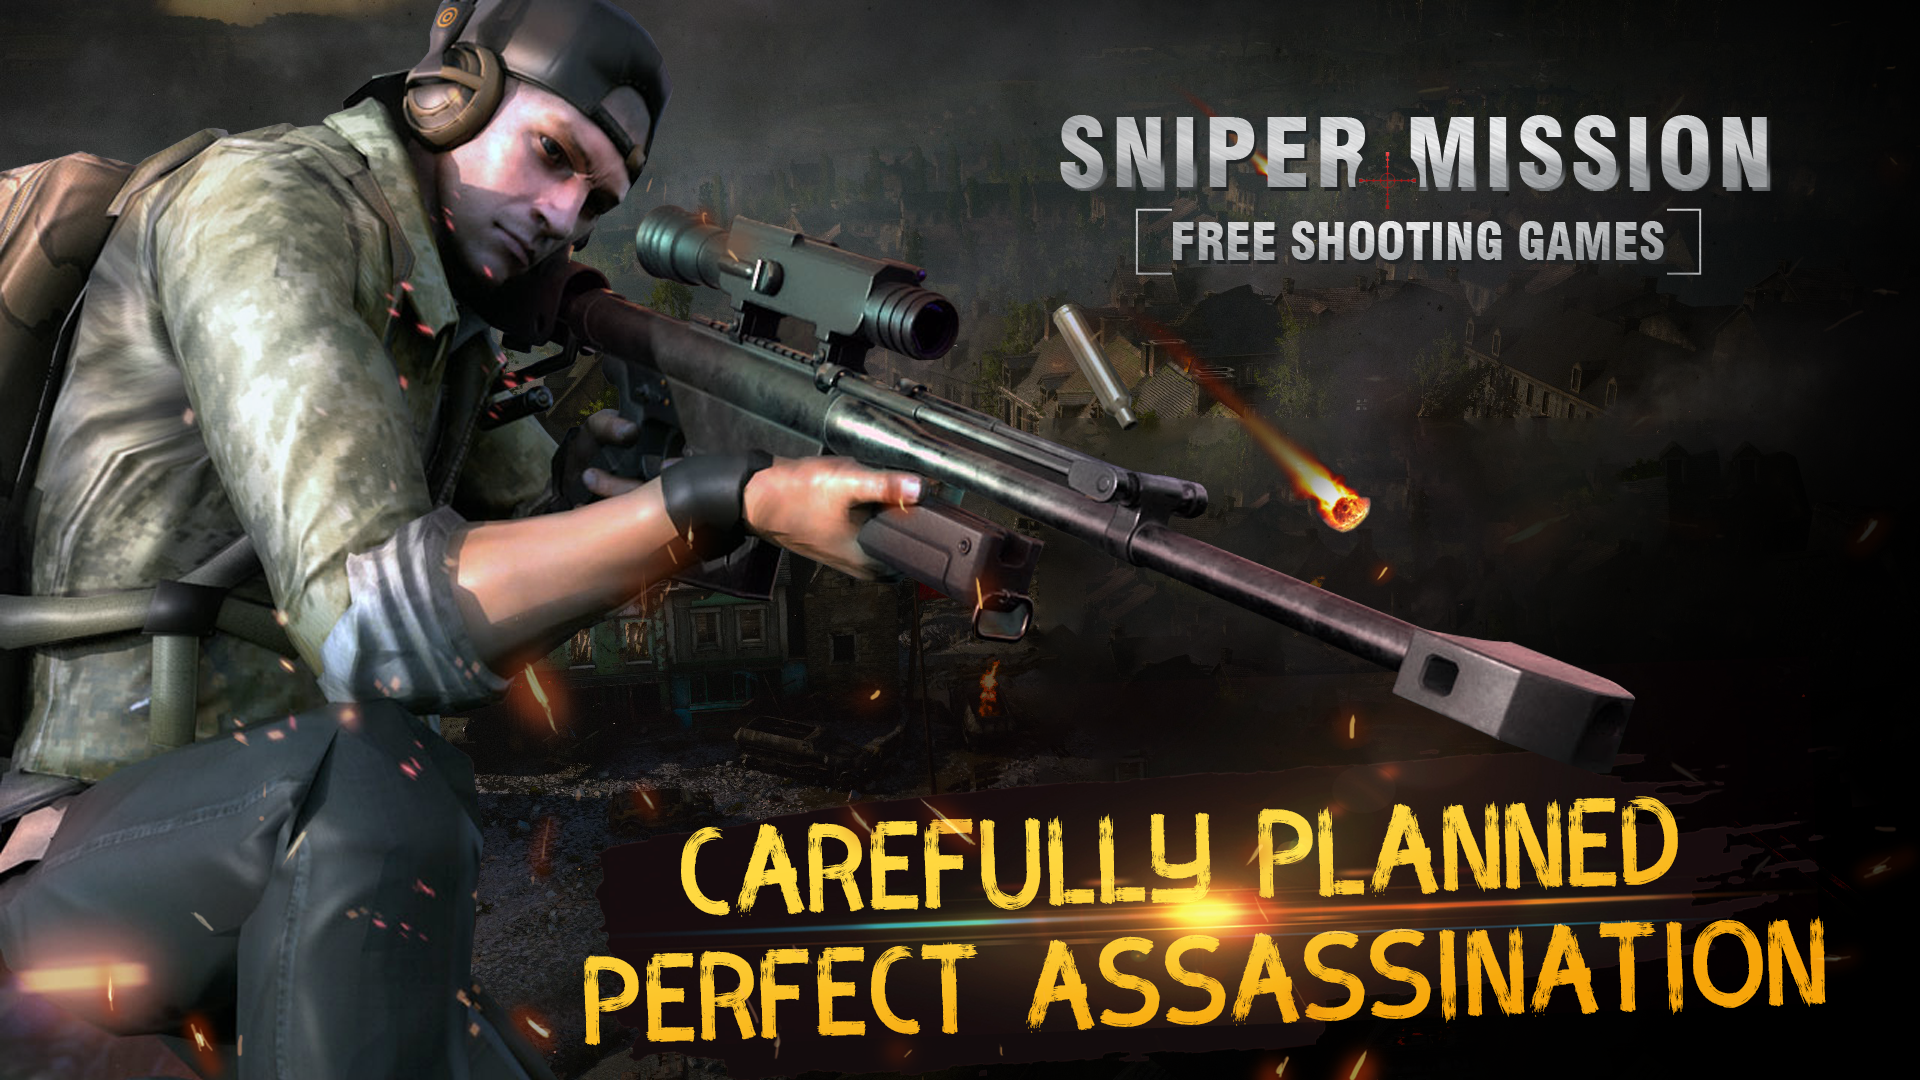 20 Best Sniper Games on Android